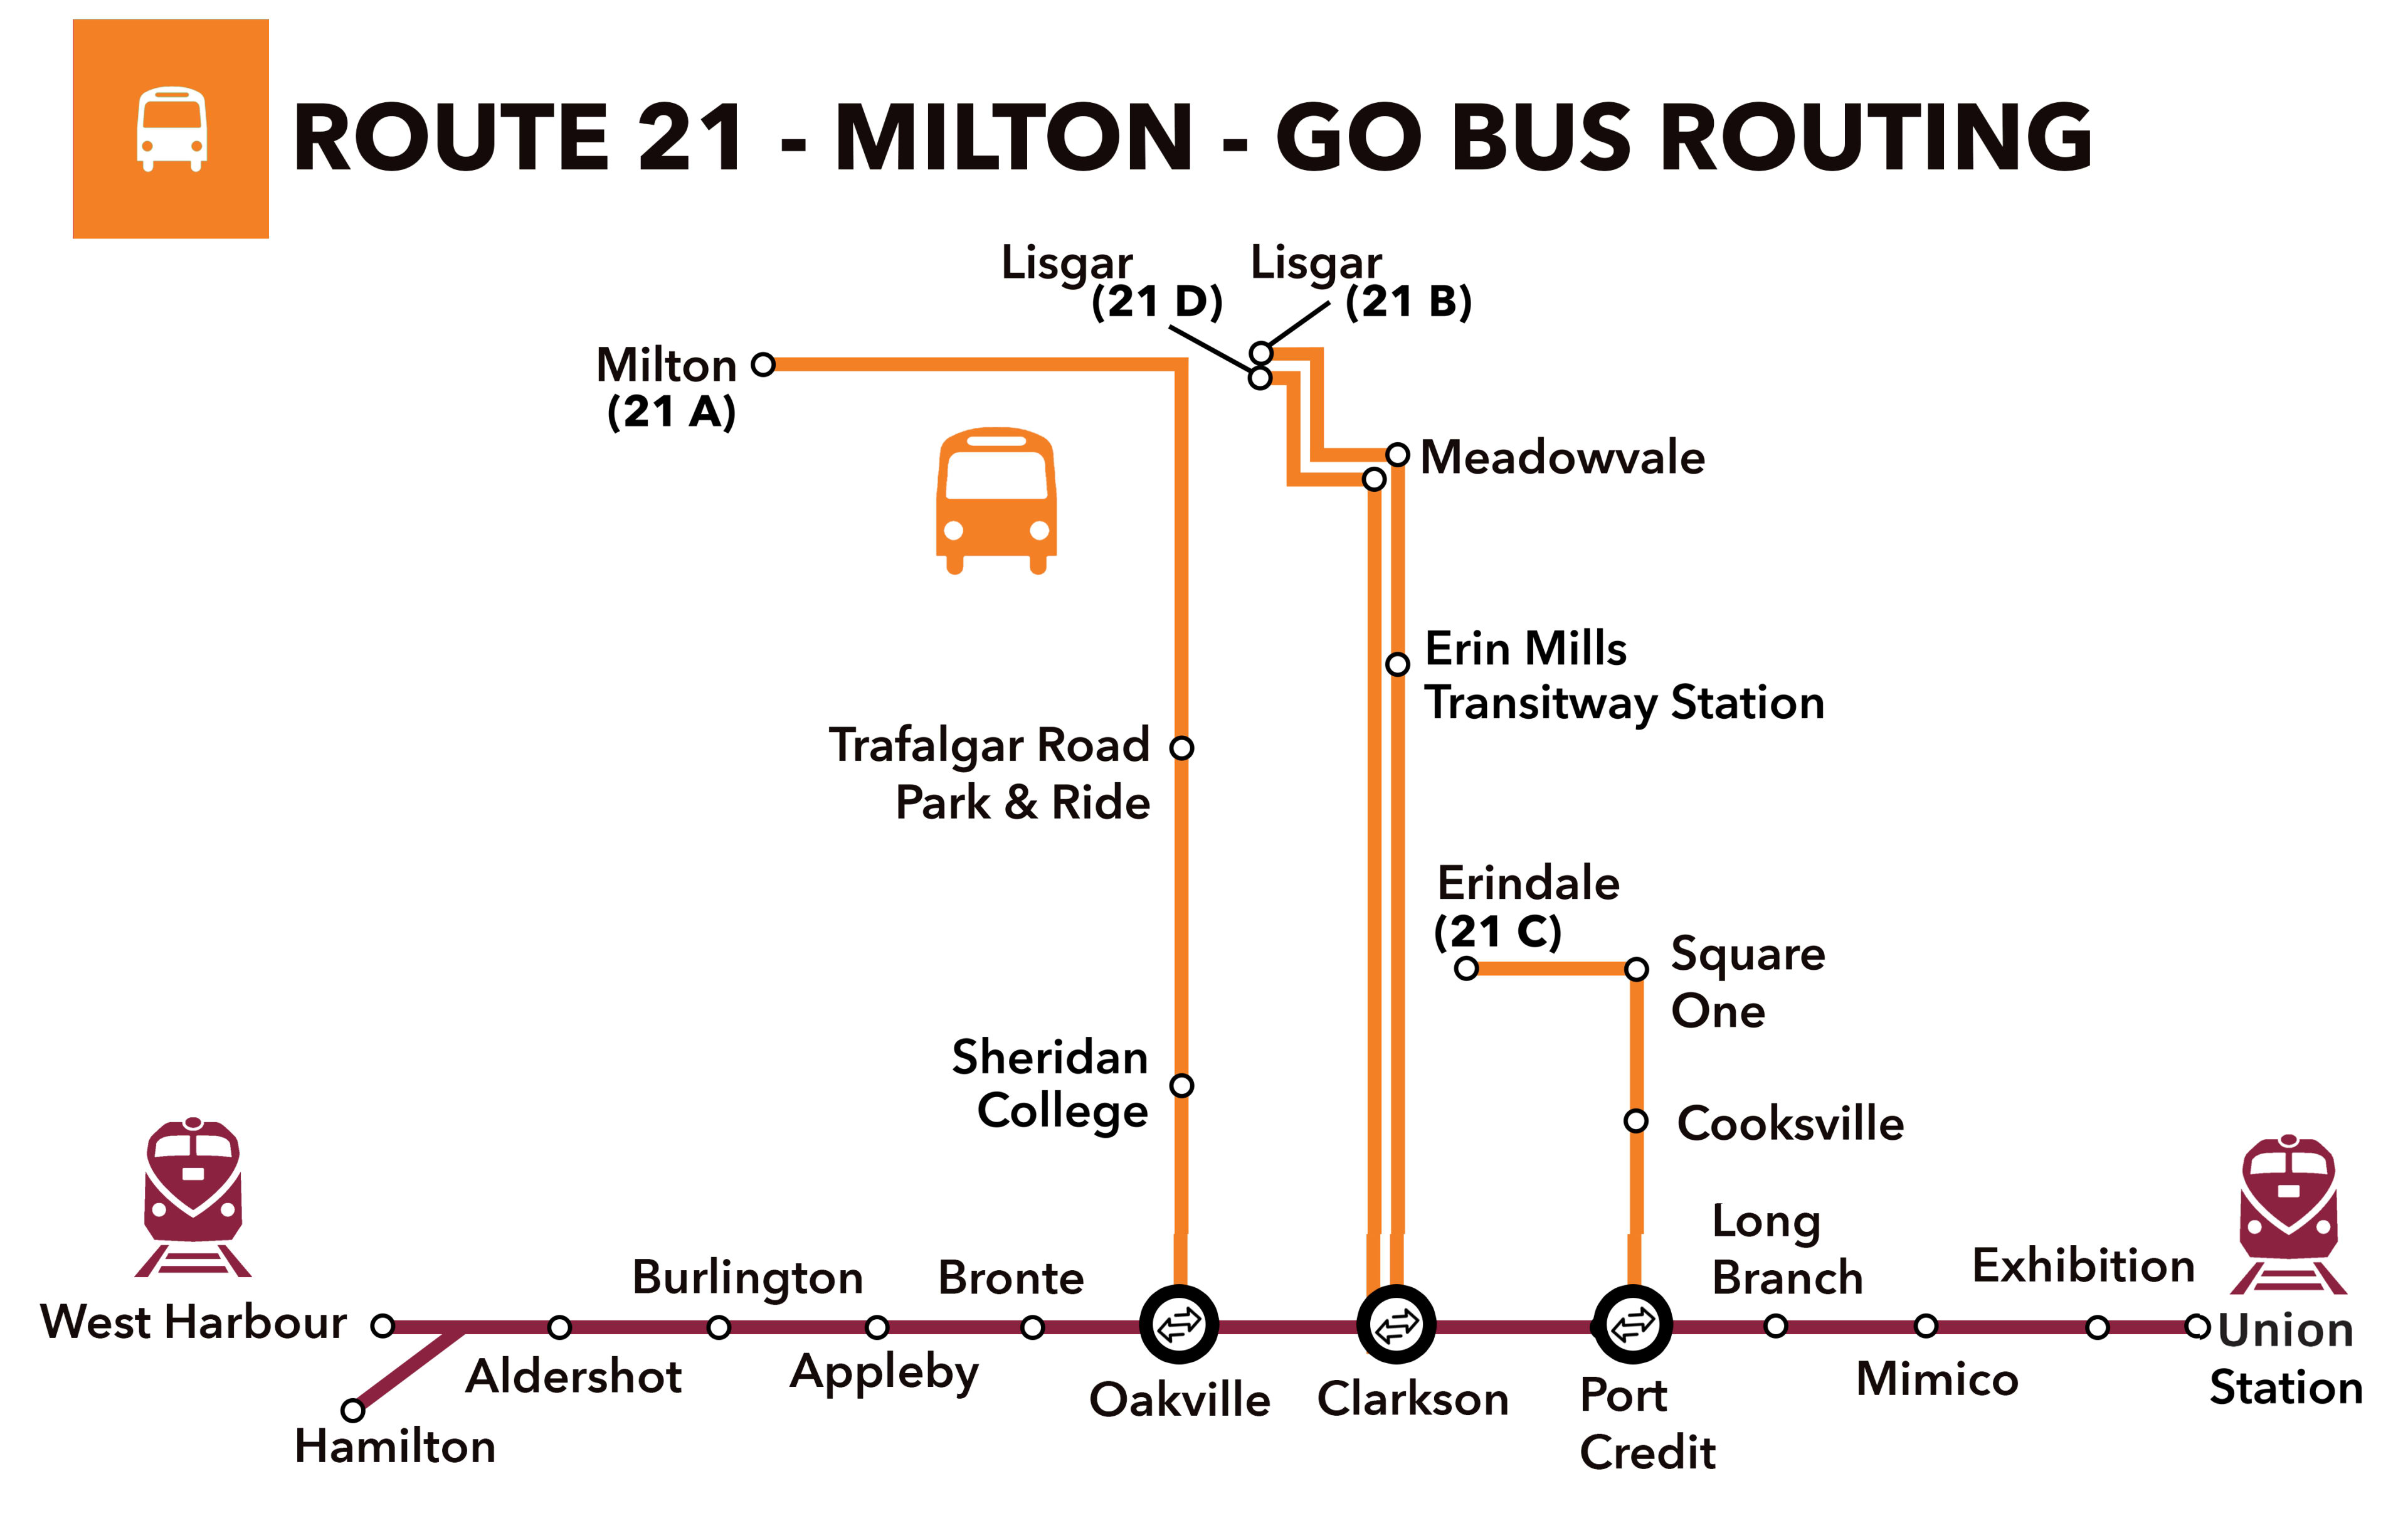 Route 21 Map to include Route 21D